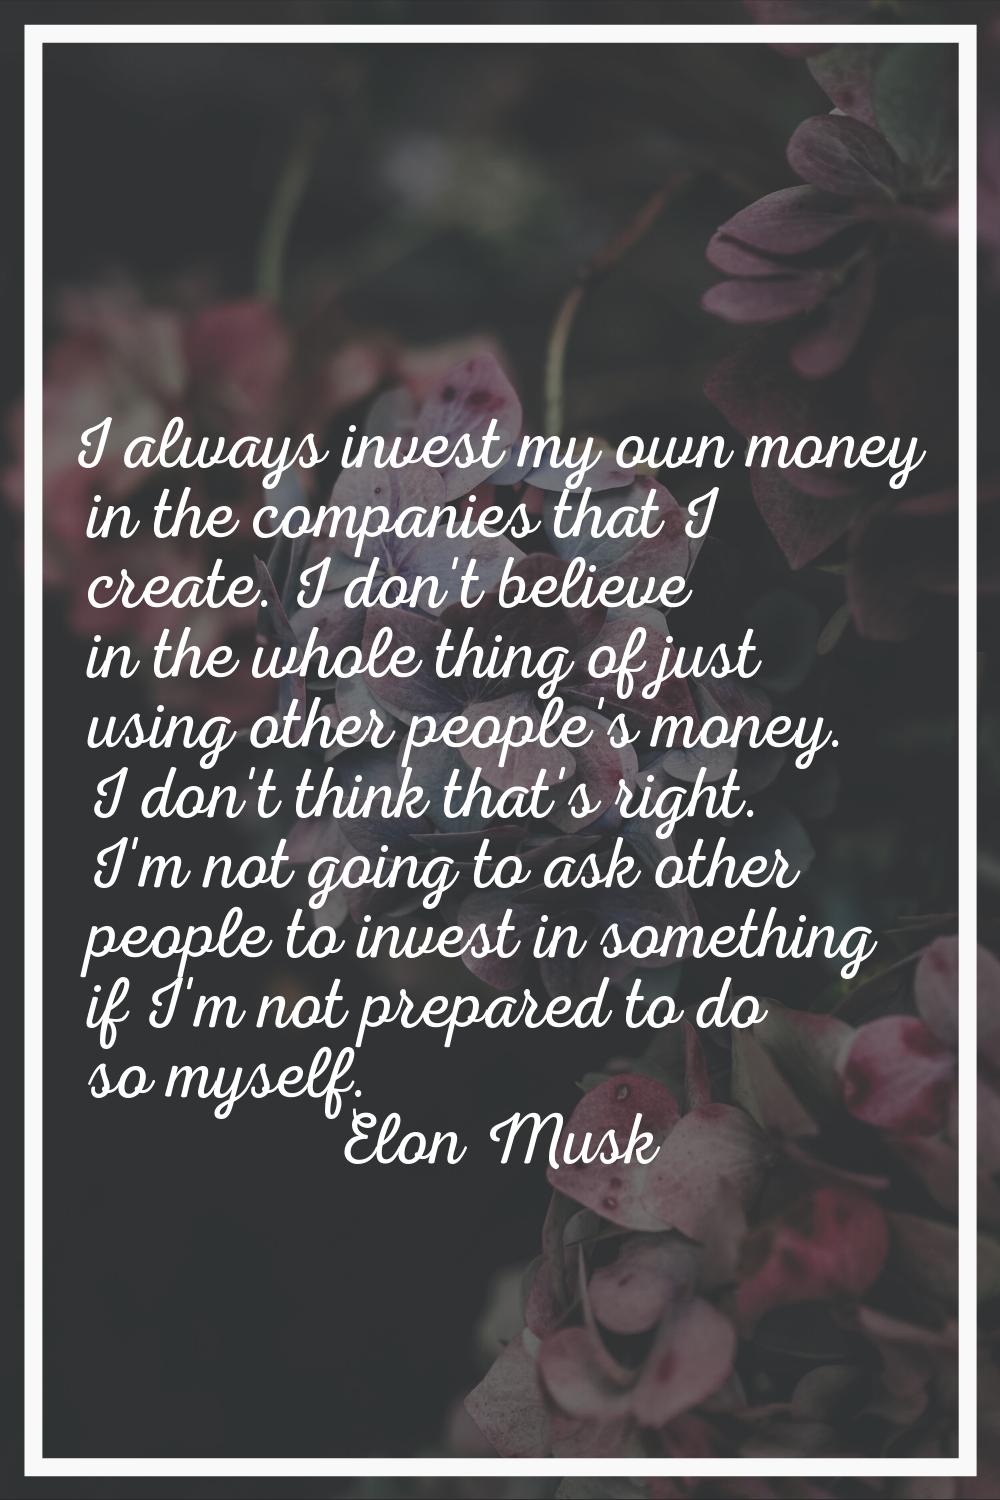 I always invest my own money in the companies that I create. I don't believe in the whole thing of 